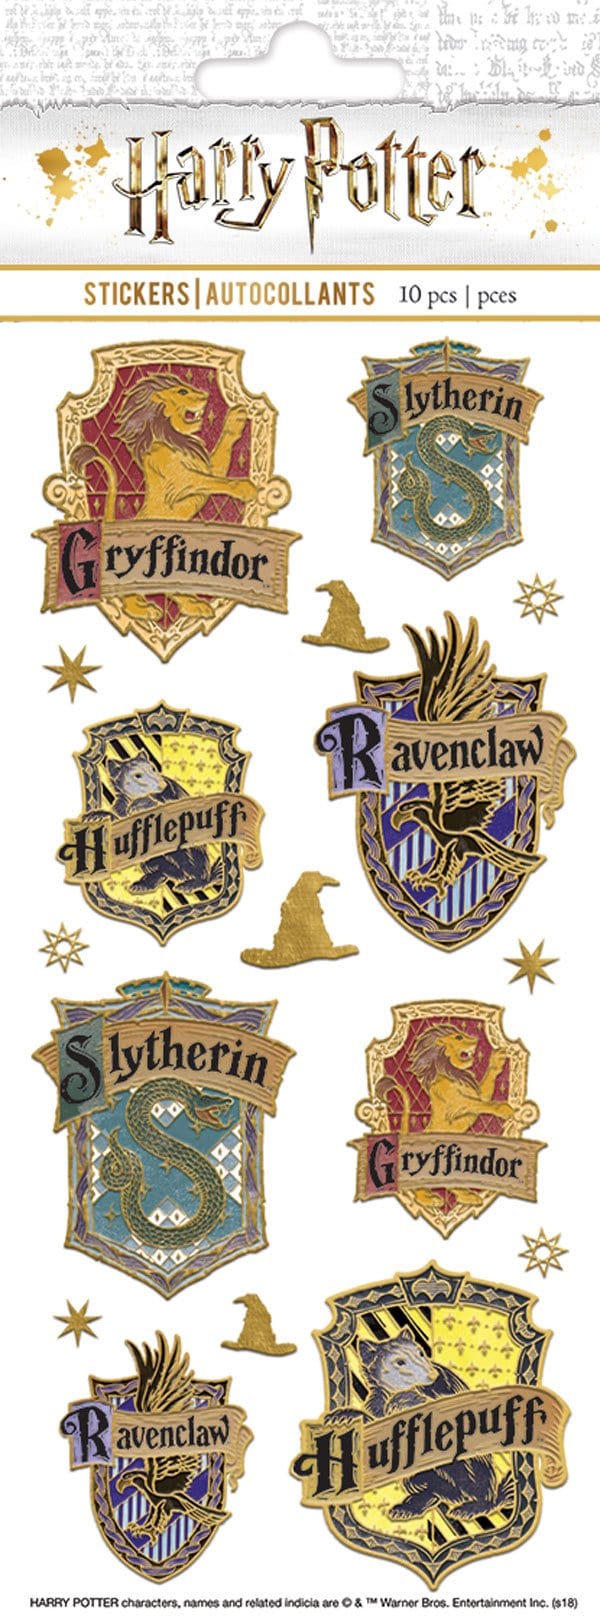 Harry Potter™ foil stickers featuring the house crests with gold accents, shown in package.